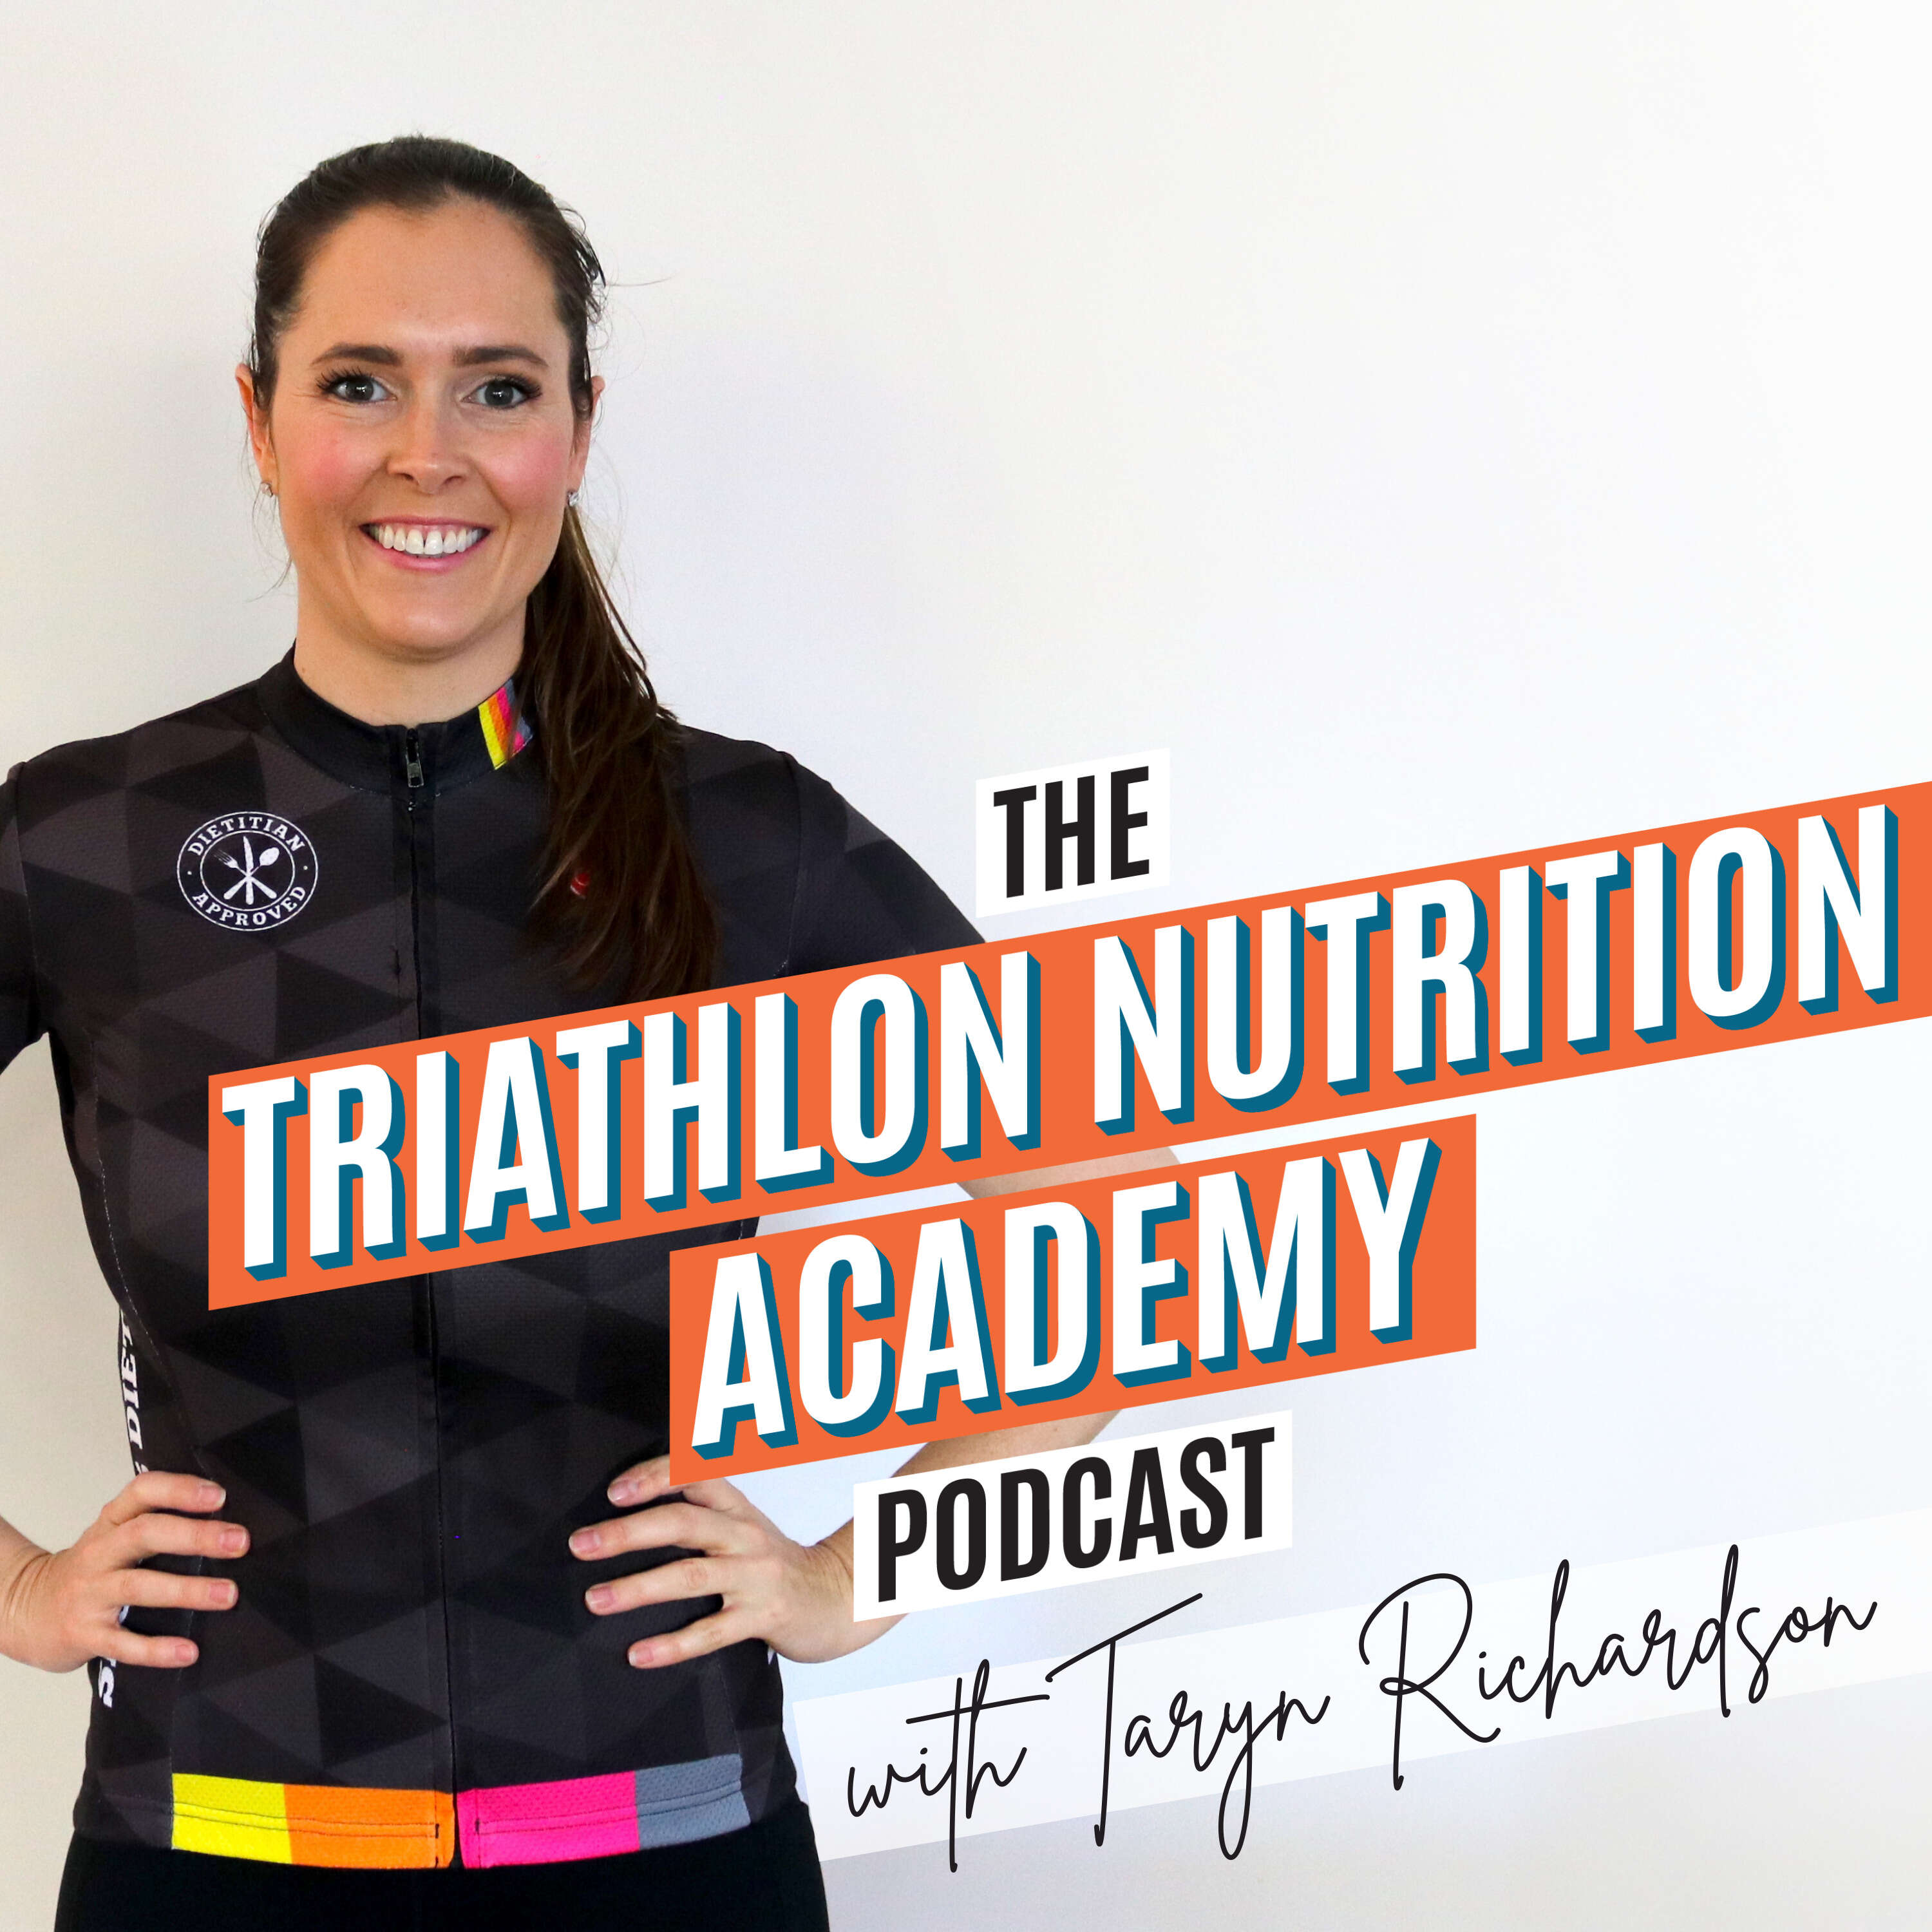 Female Athlete Series: Part 1: Physiological differences between male and female triathletes